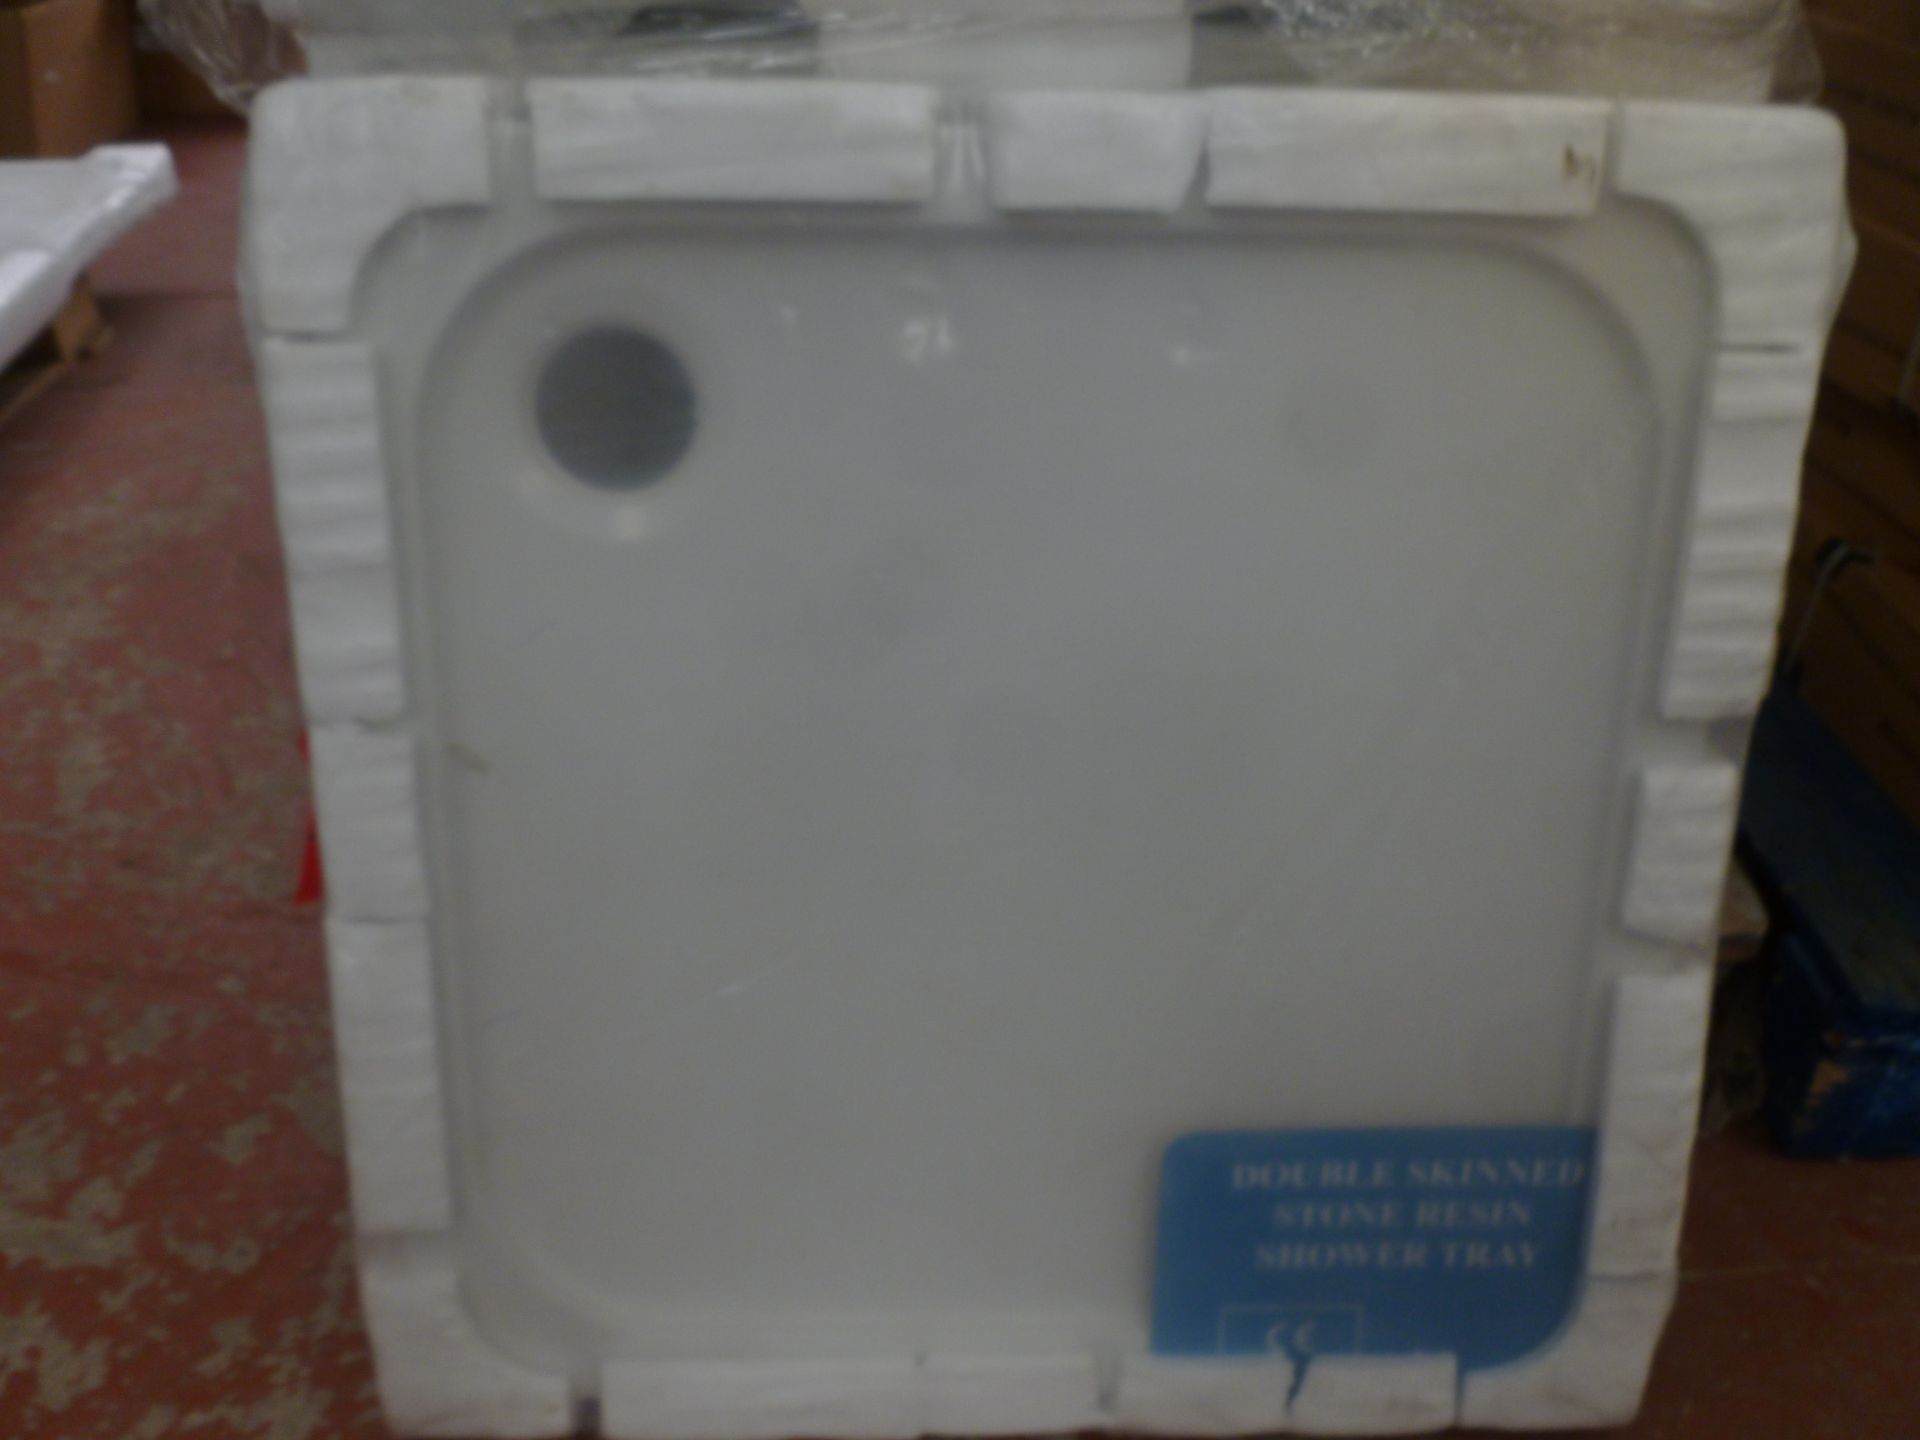 Brista 760 Square Blu Gem Shower Tray. New and sealed.